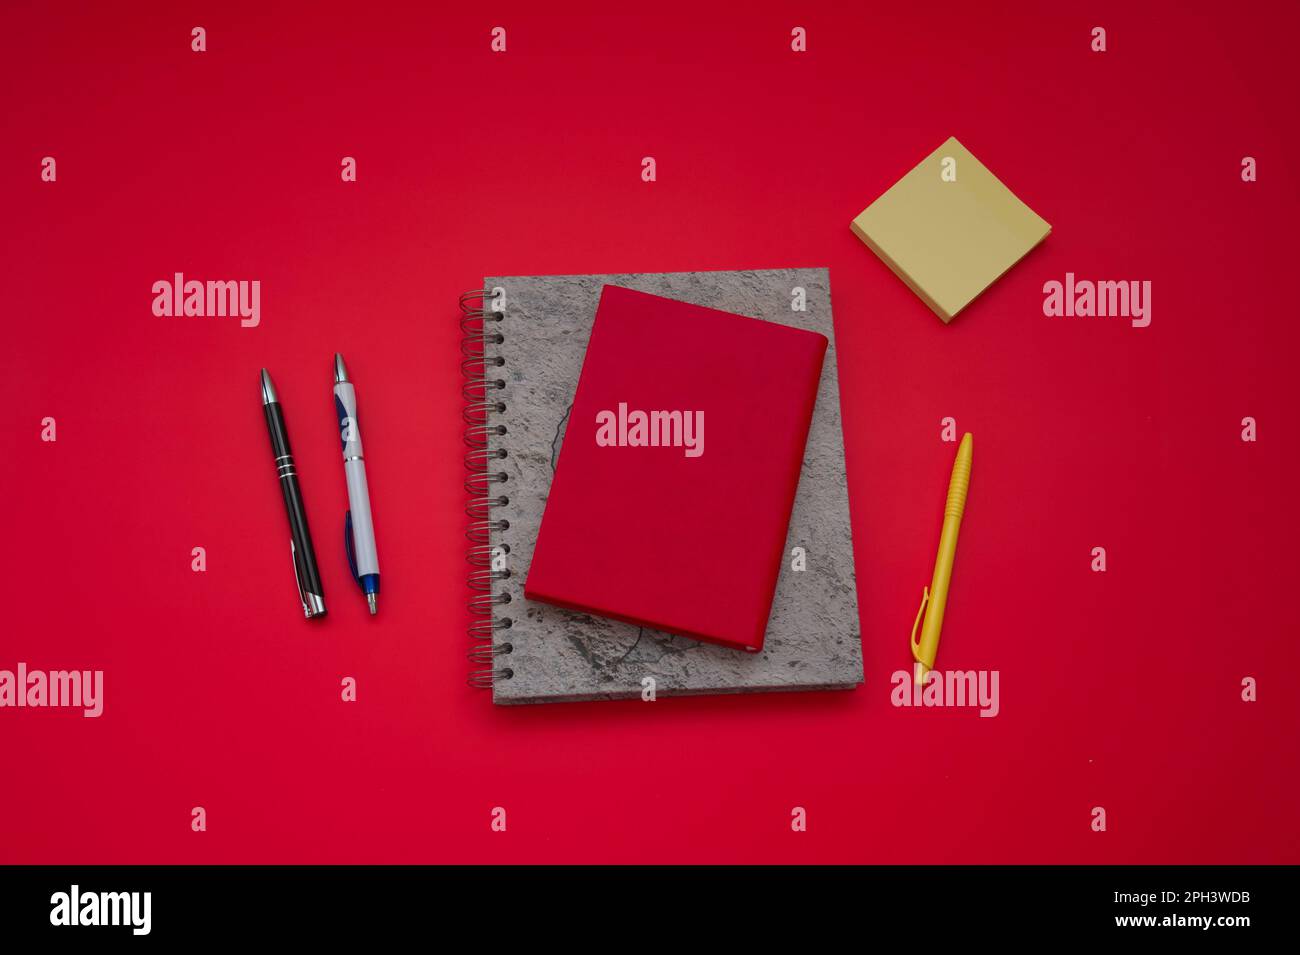 Office supplies stationery on a red background Stock Photo